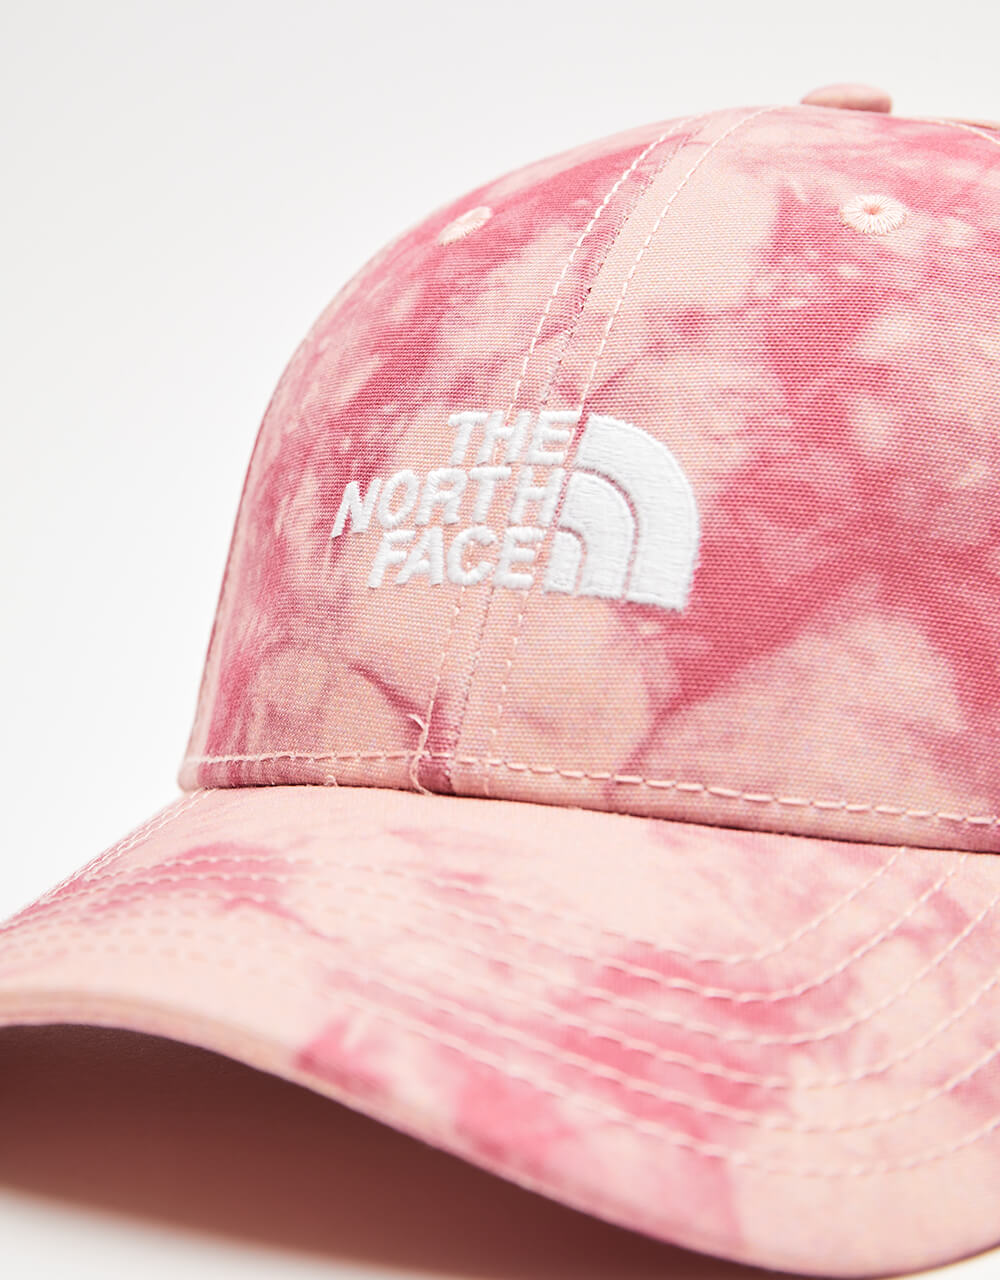 The North Face Recycled 66 Classic Cap - Slate Rose Dye Texture Print